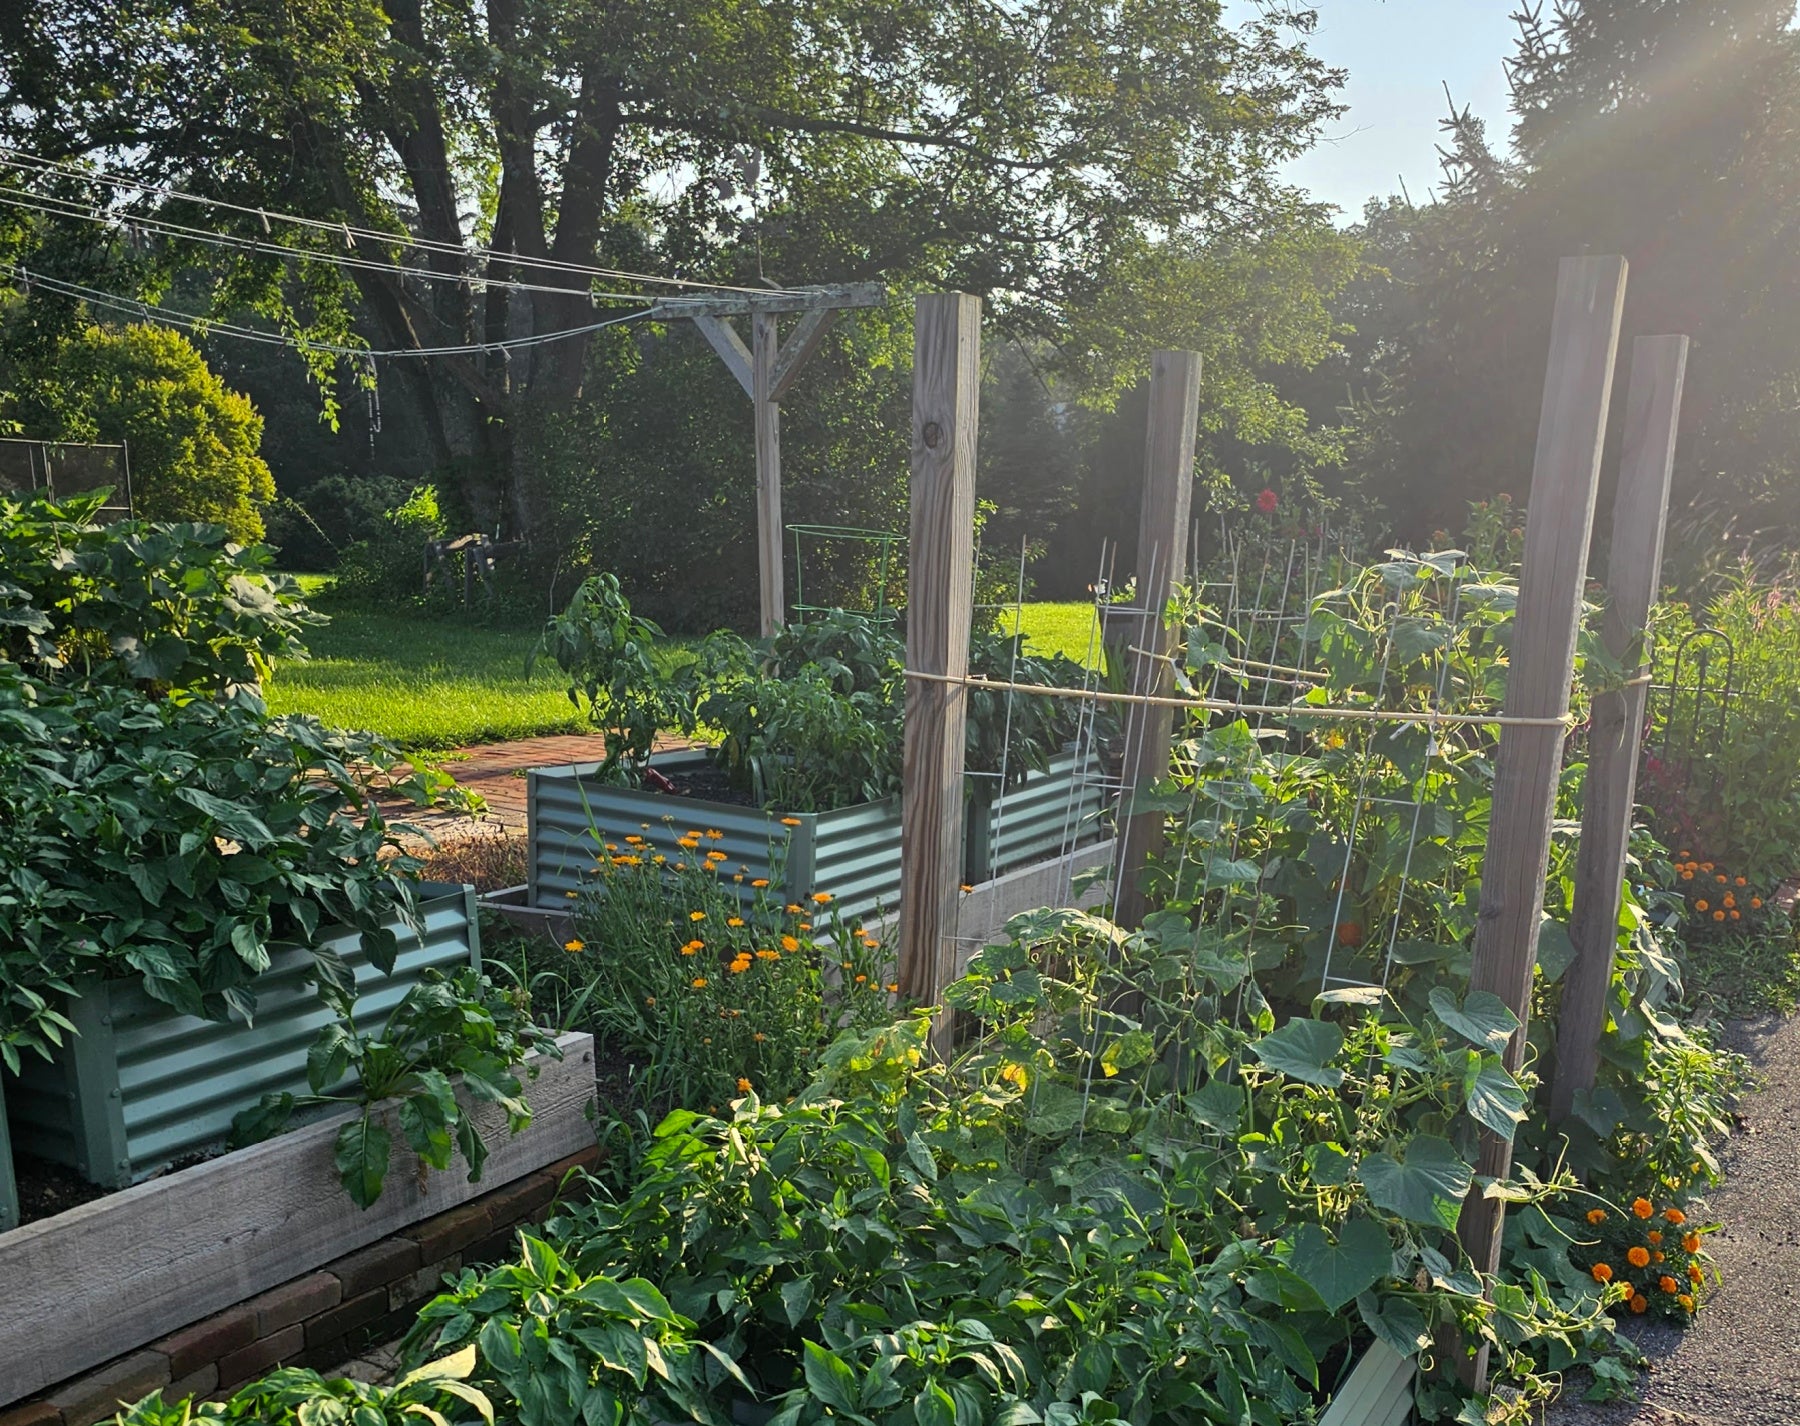 sage cuadra garden beds with peppers, cucumbers and tomatoes